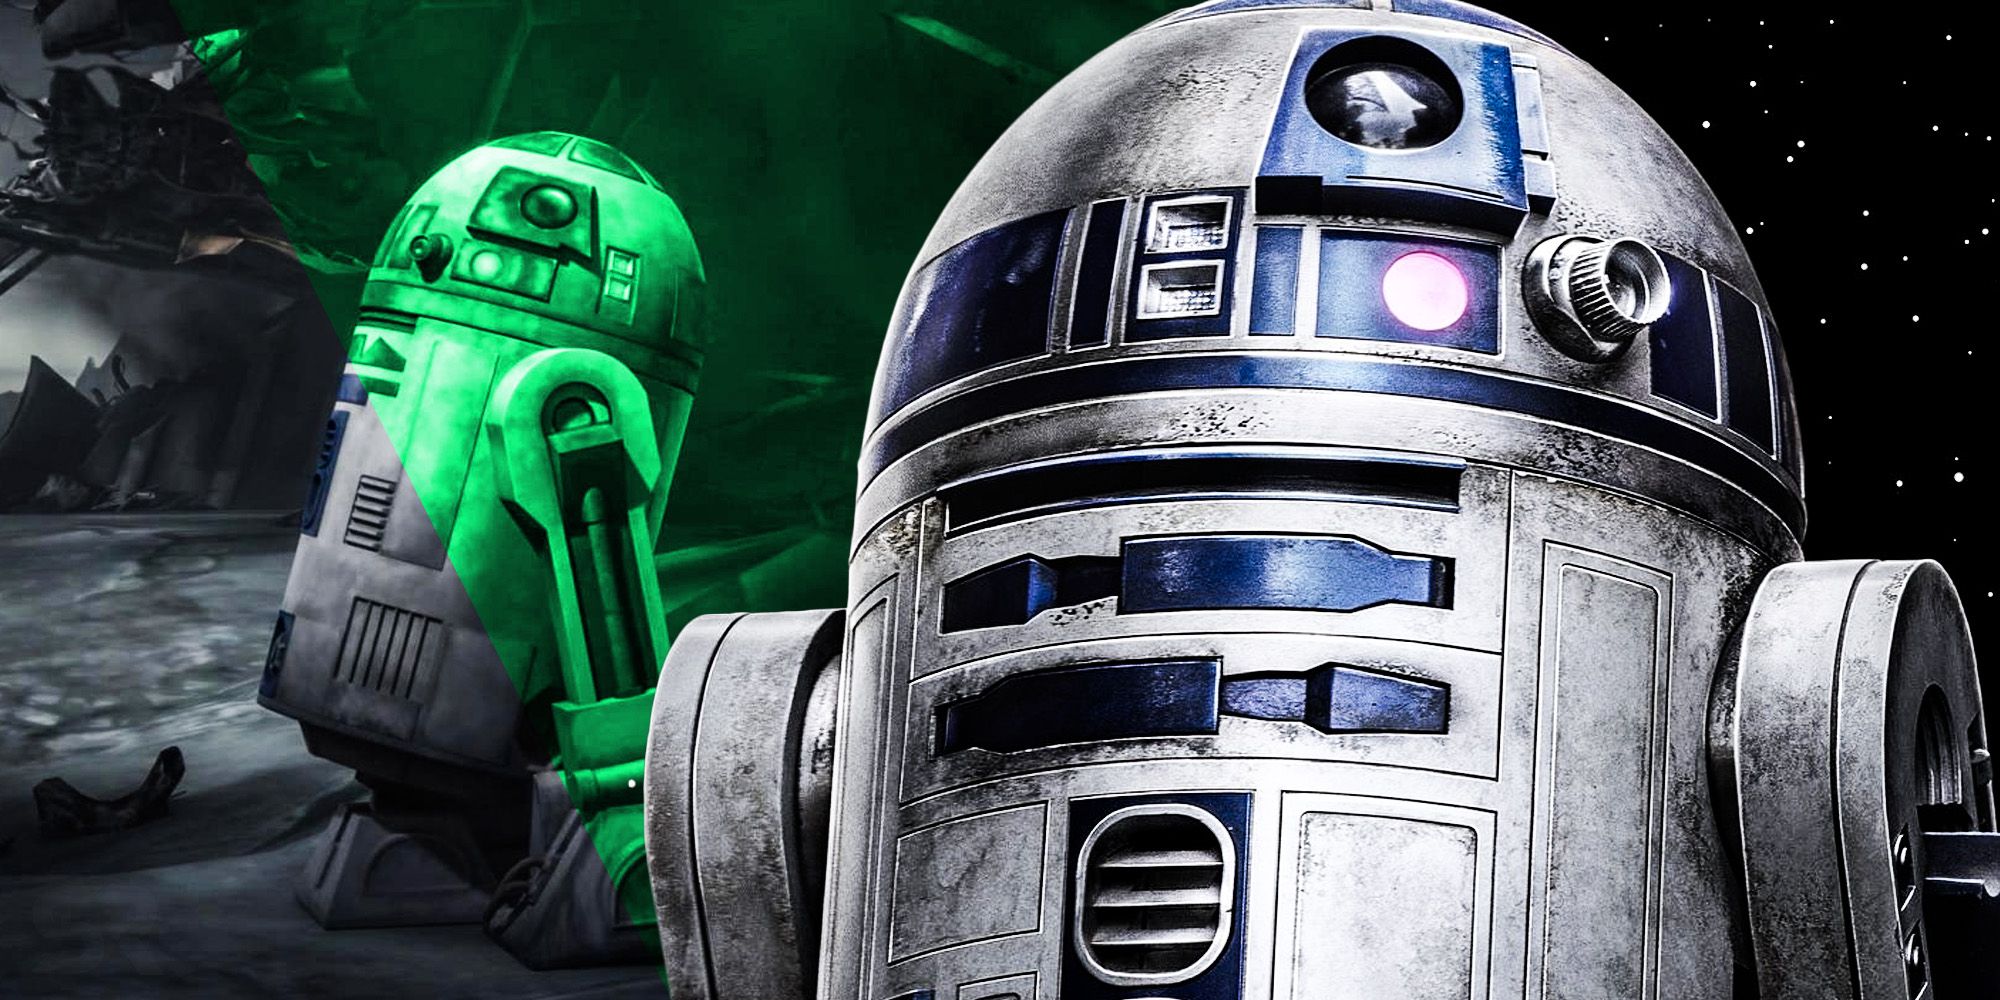 Star Wars Contradicts R2D2 Clone wars story arc